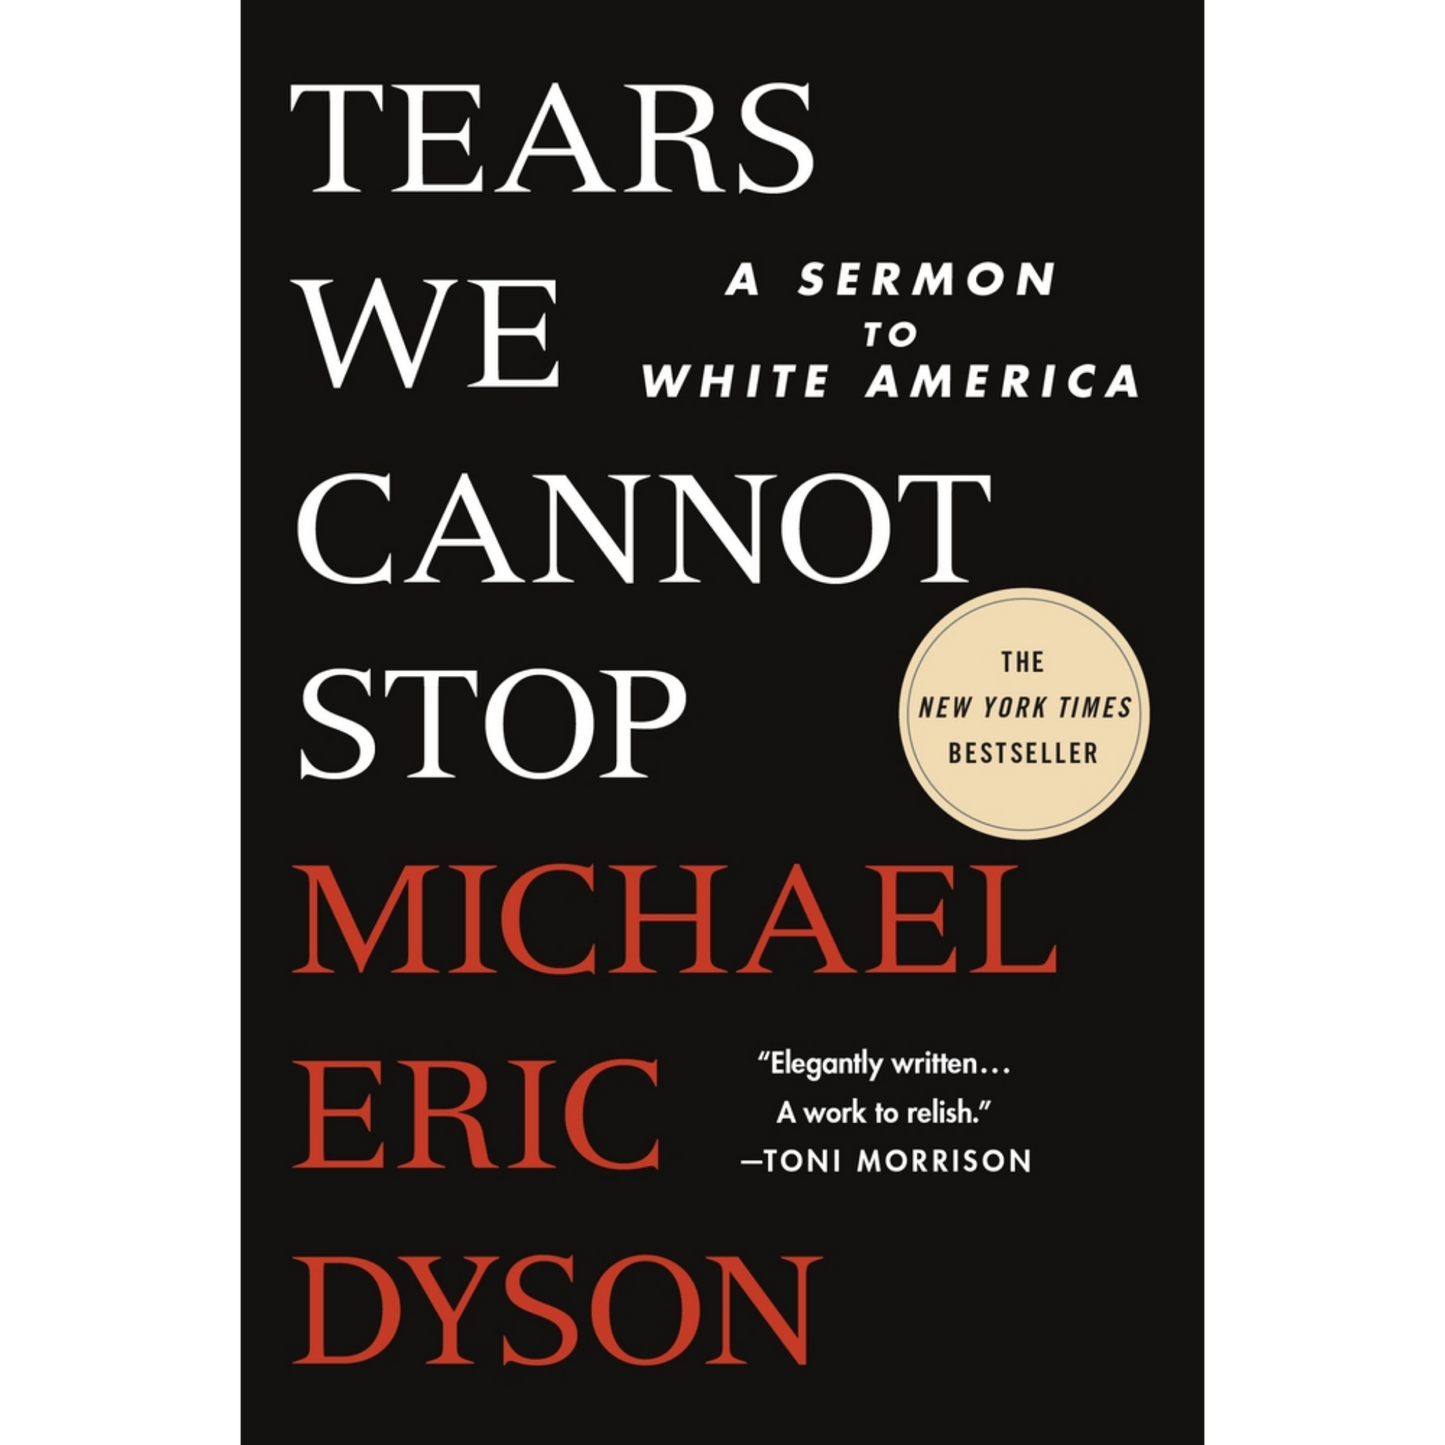 tears we cannot stop michael eric dyson